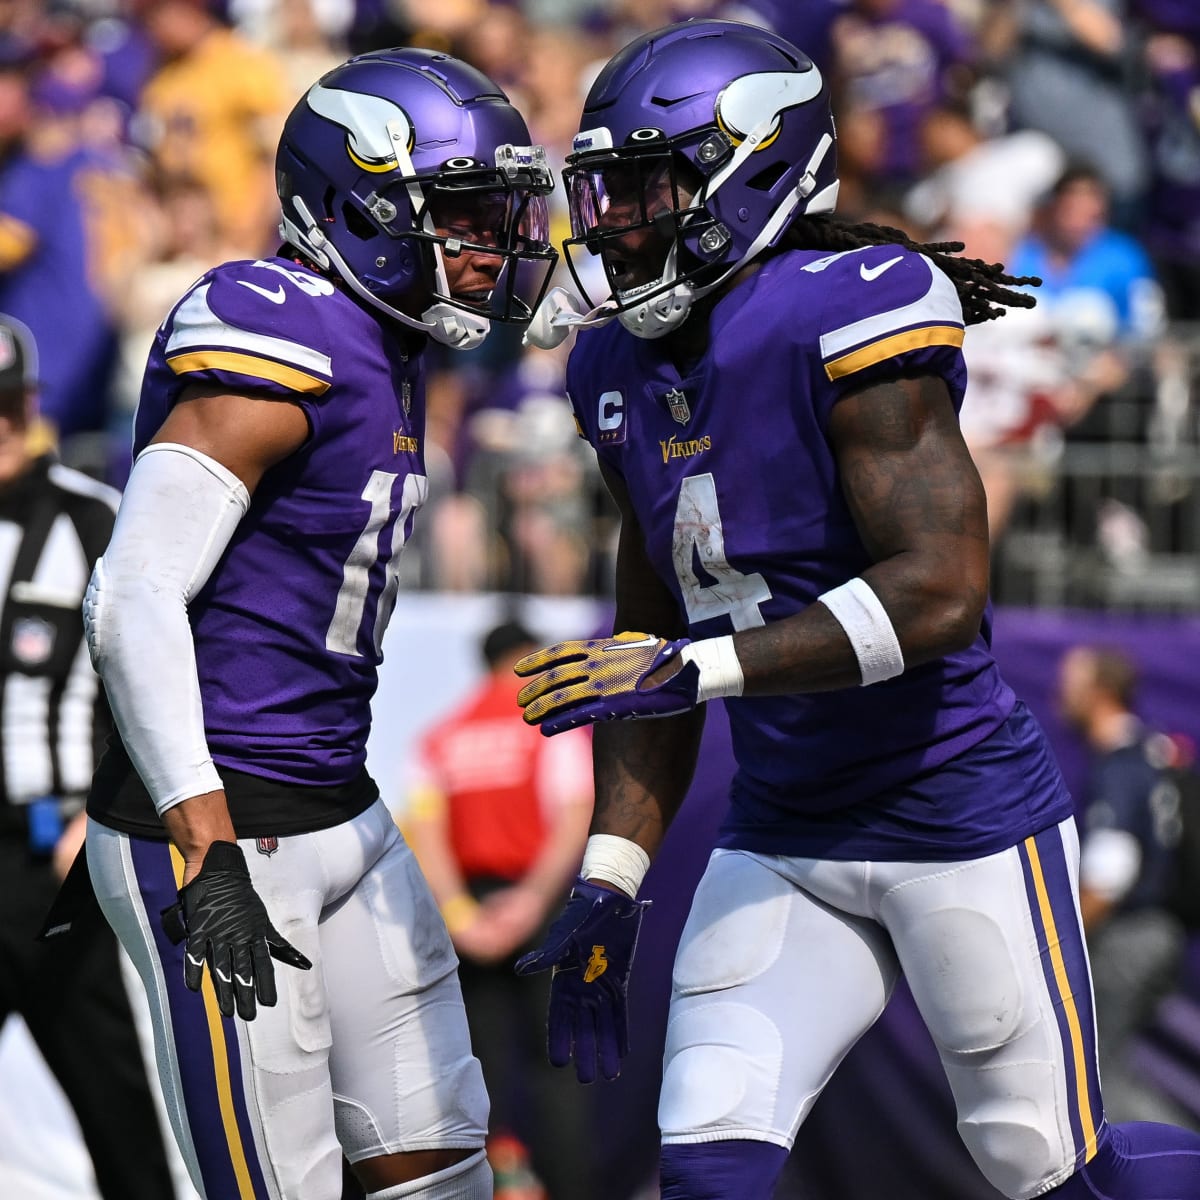 JV on X: The NFL really just let the Minnesota #Vikings get